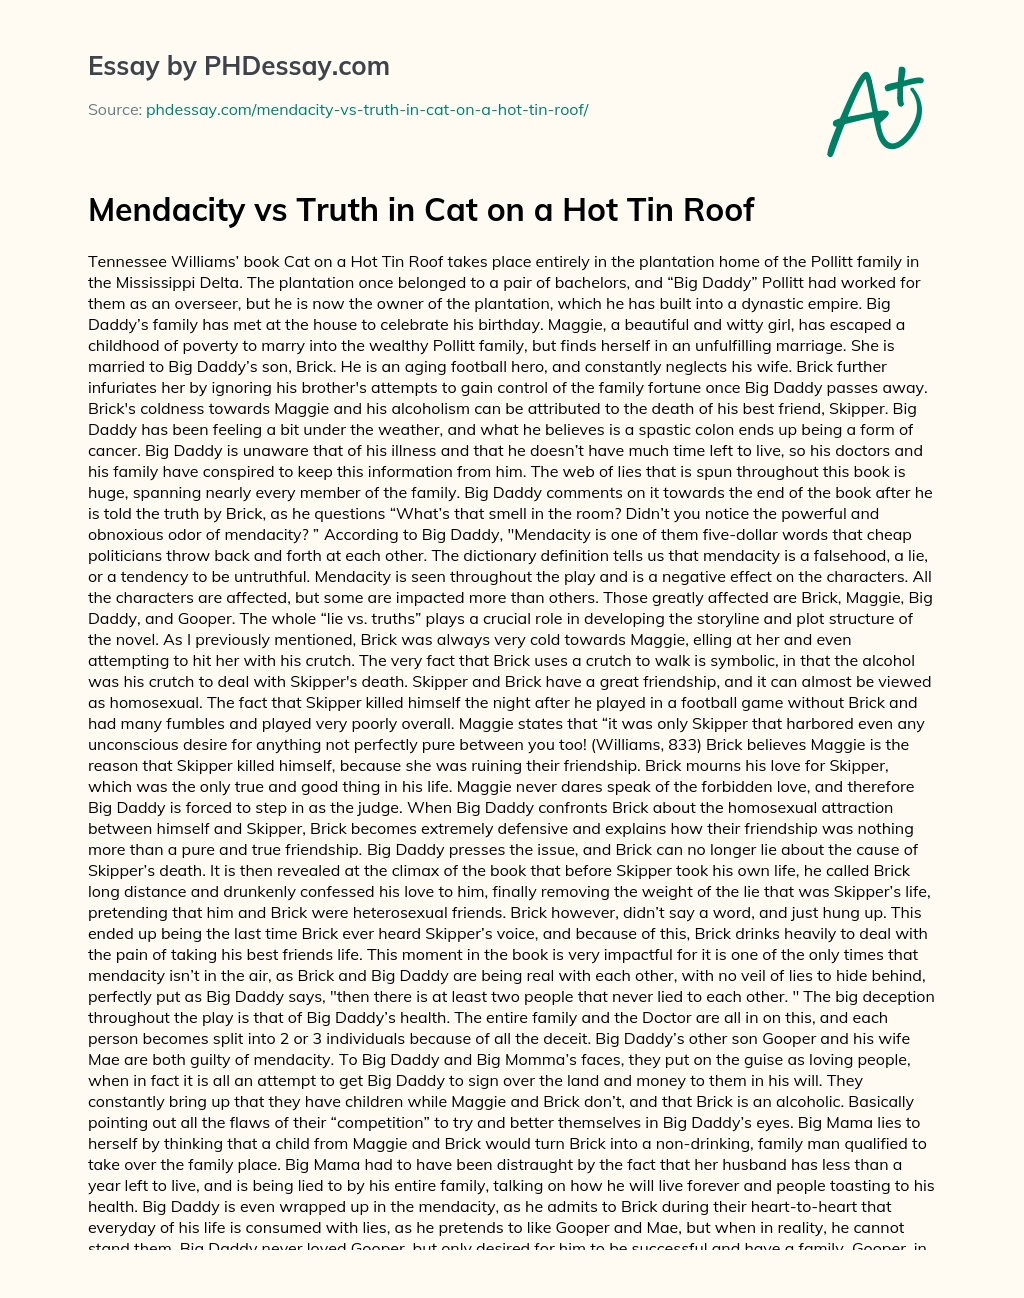 Mendacity vs Truth in Cat on a Hot Tin Roof essay